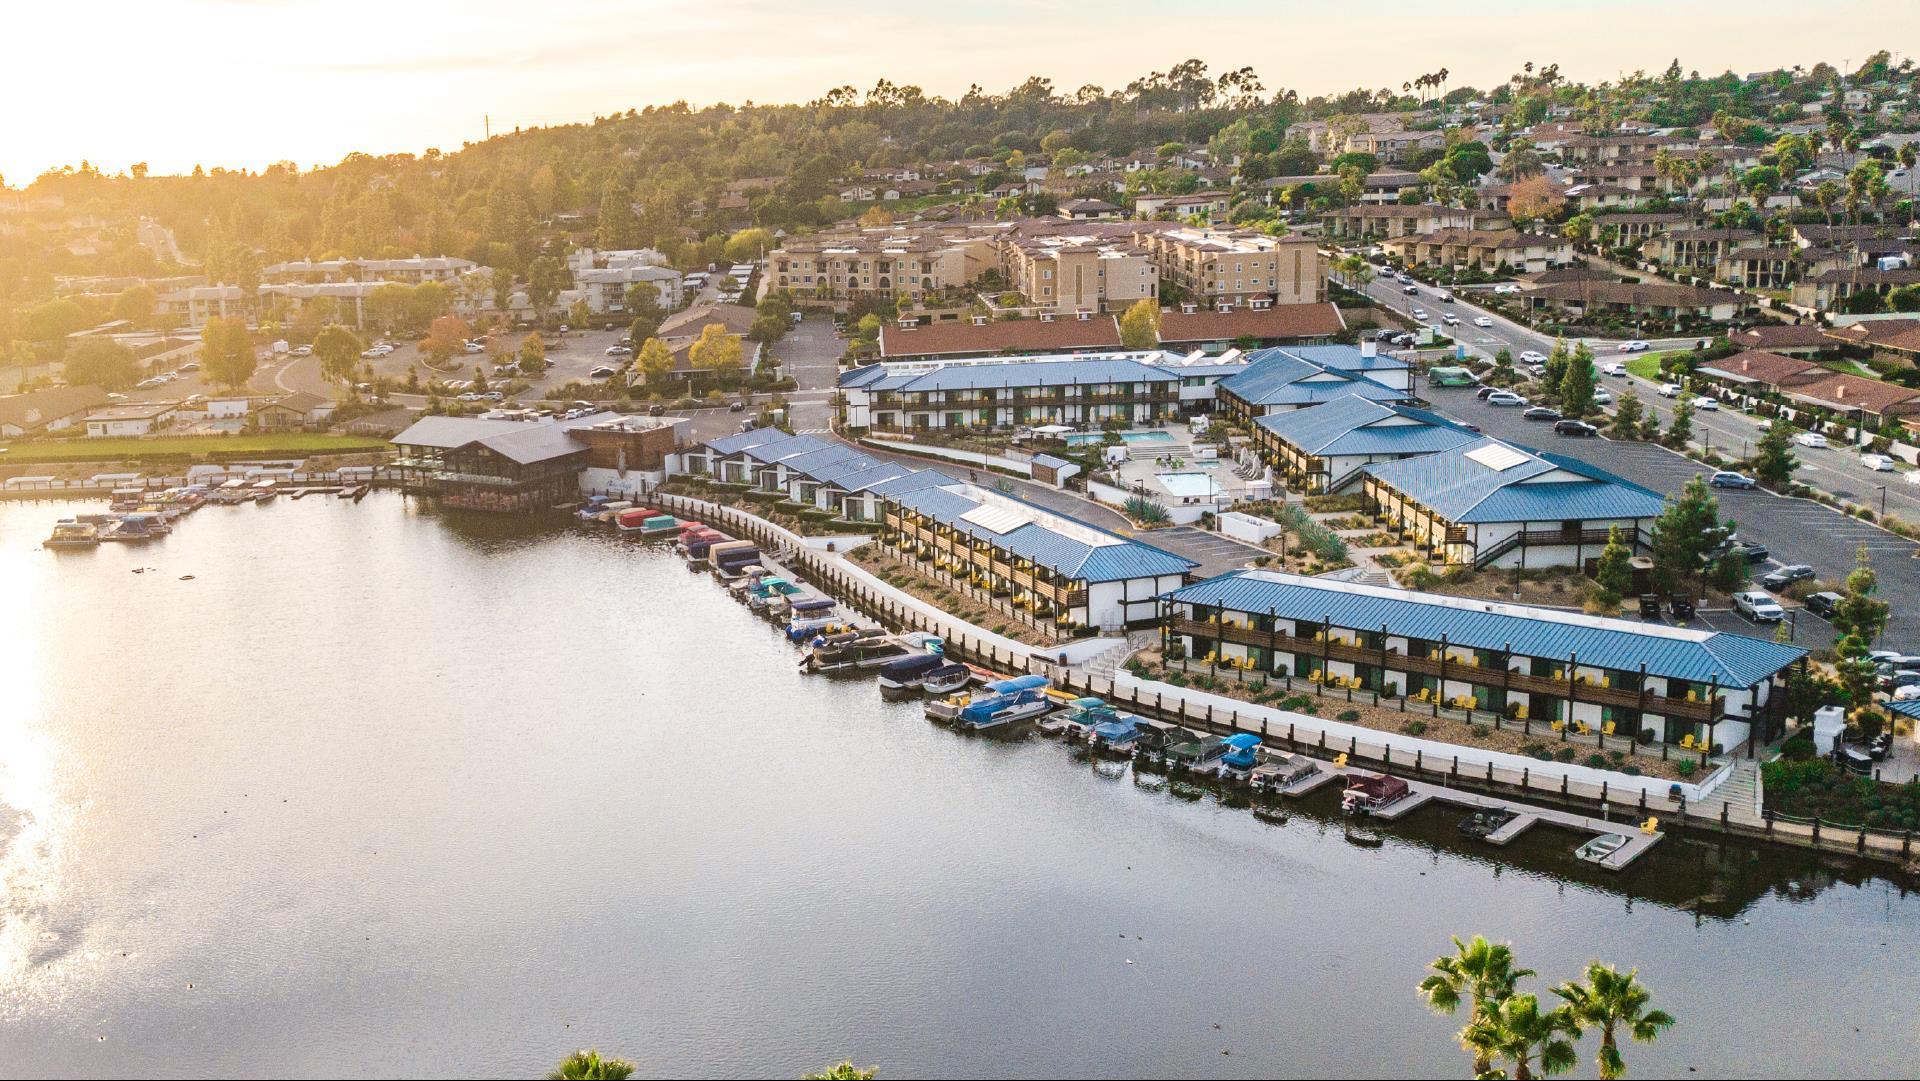 The Lakehouse Hotel and Resort in San Marcos, CA